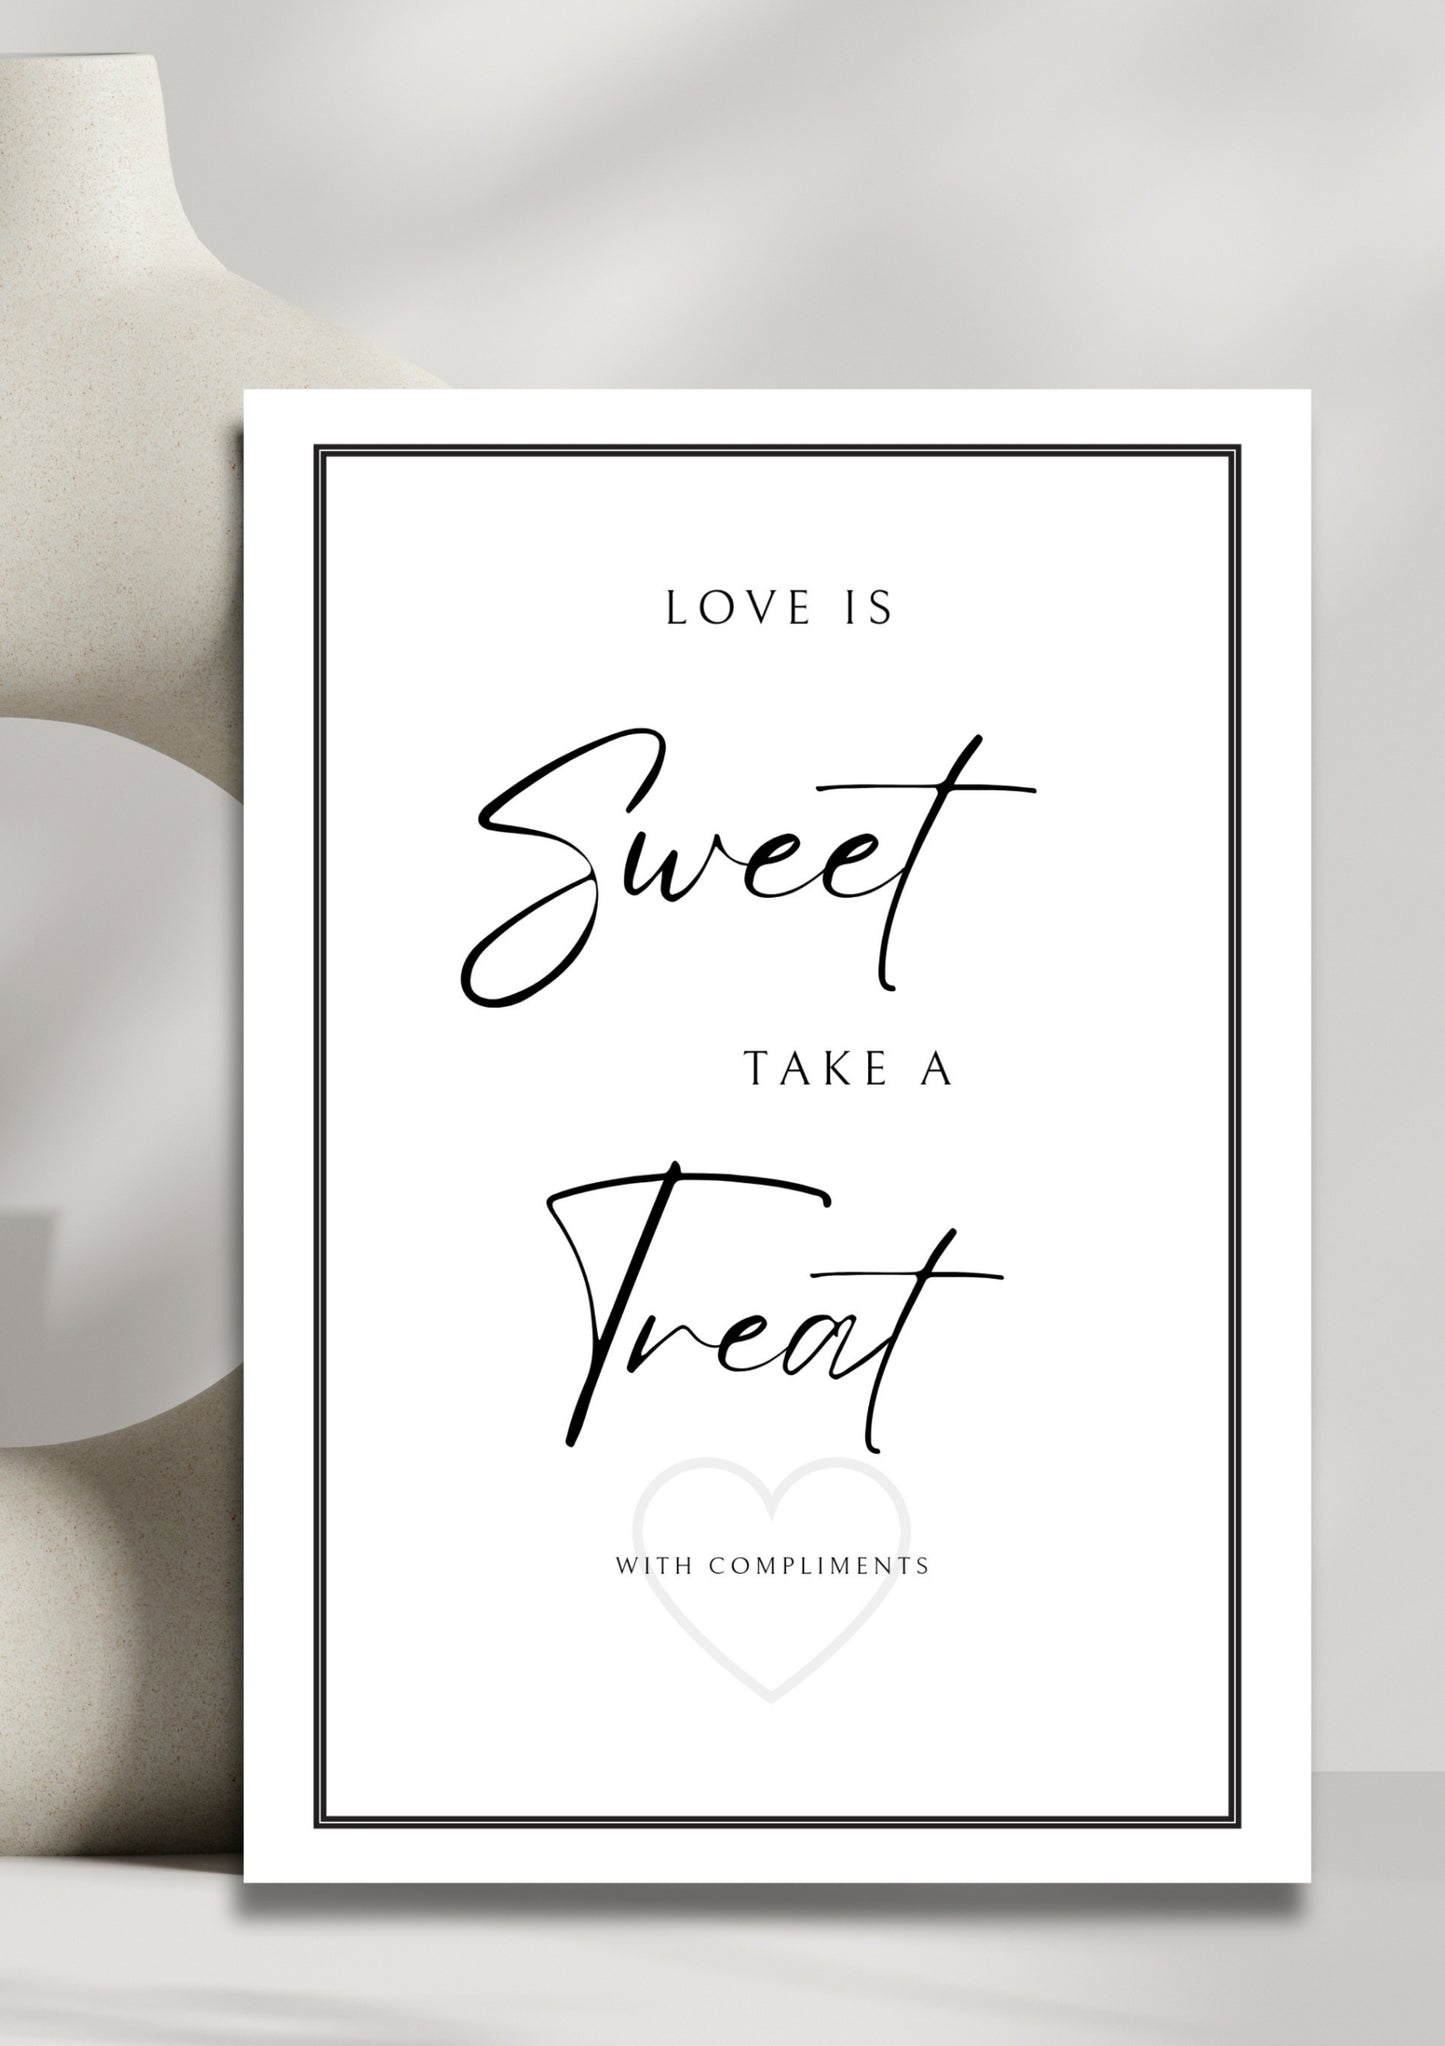 White stone collection - sweet cart/ table sign